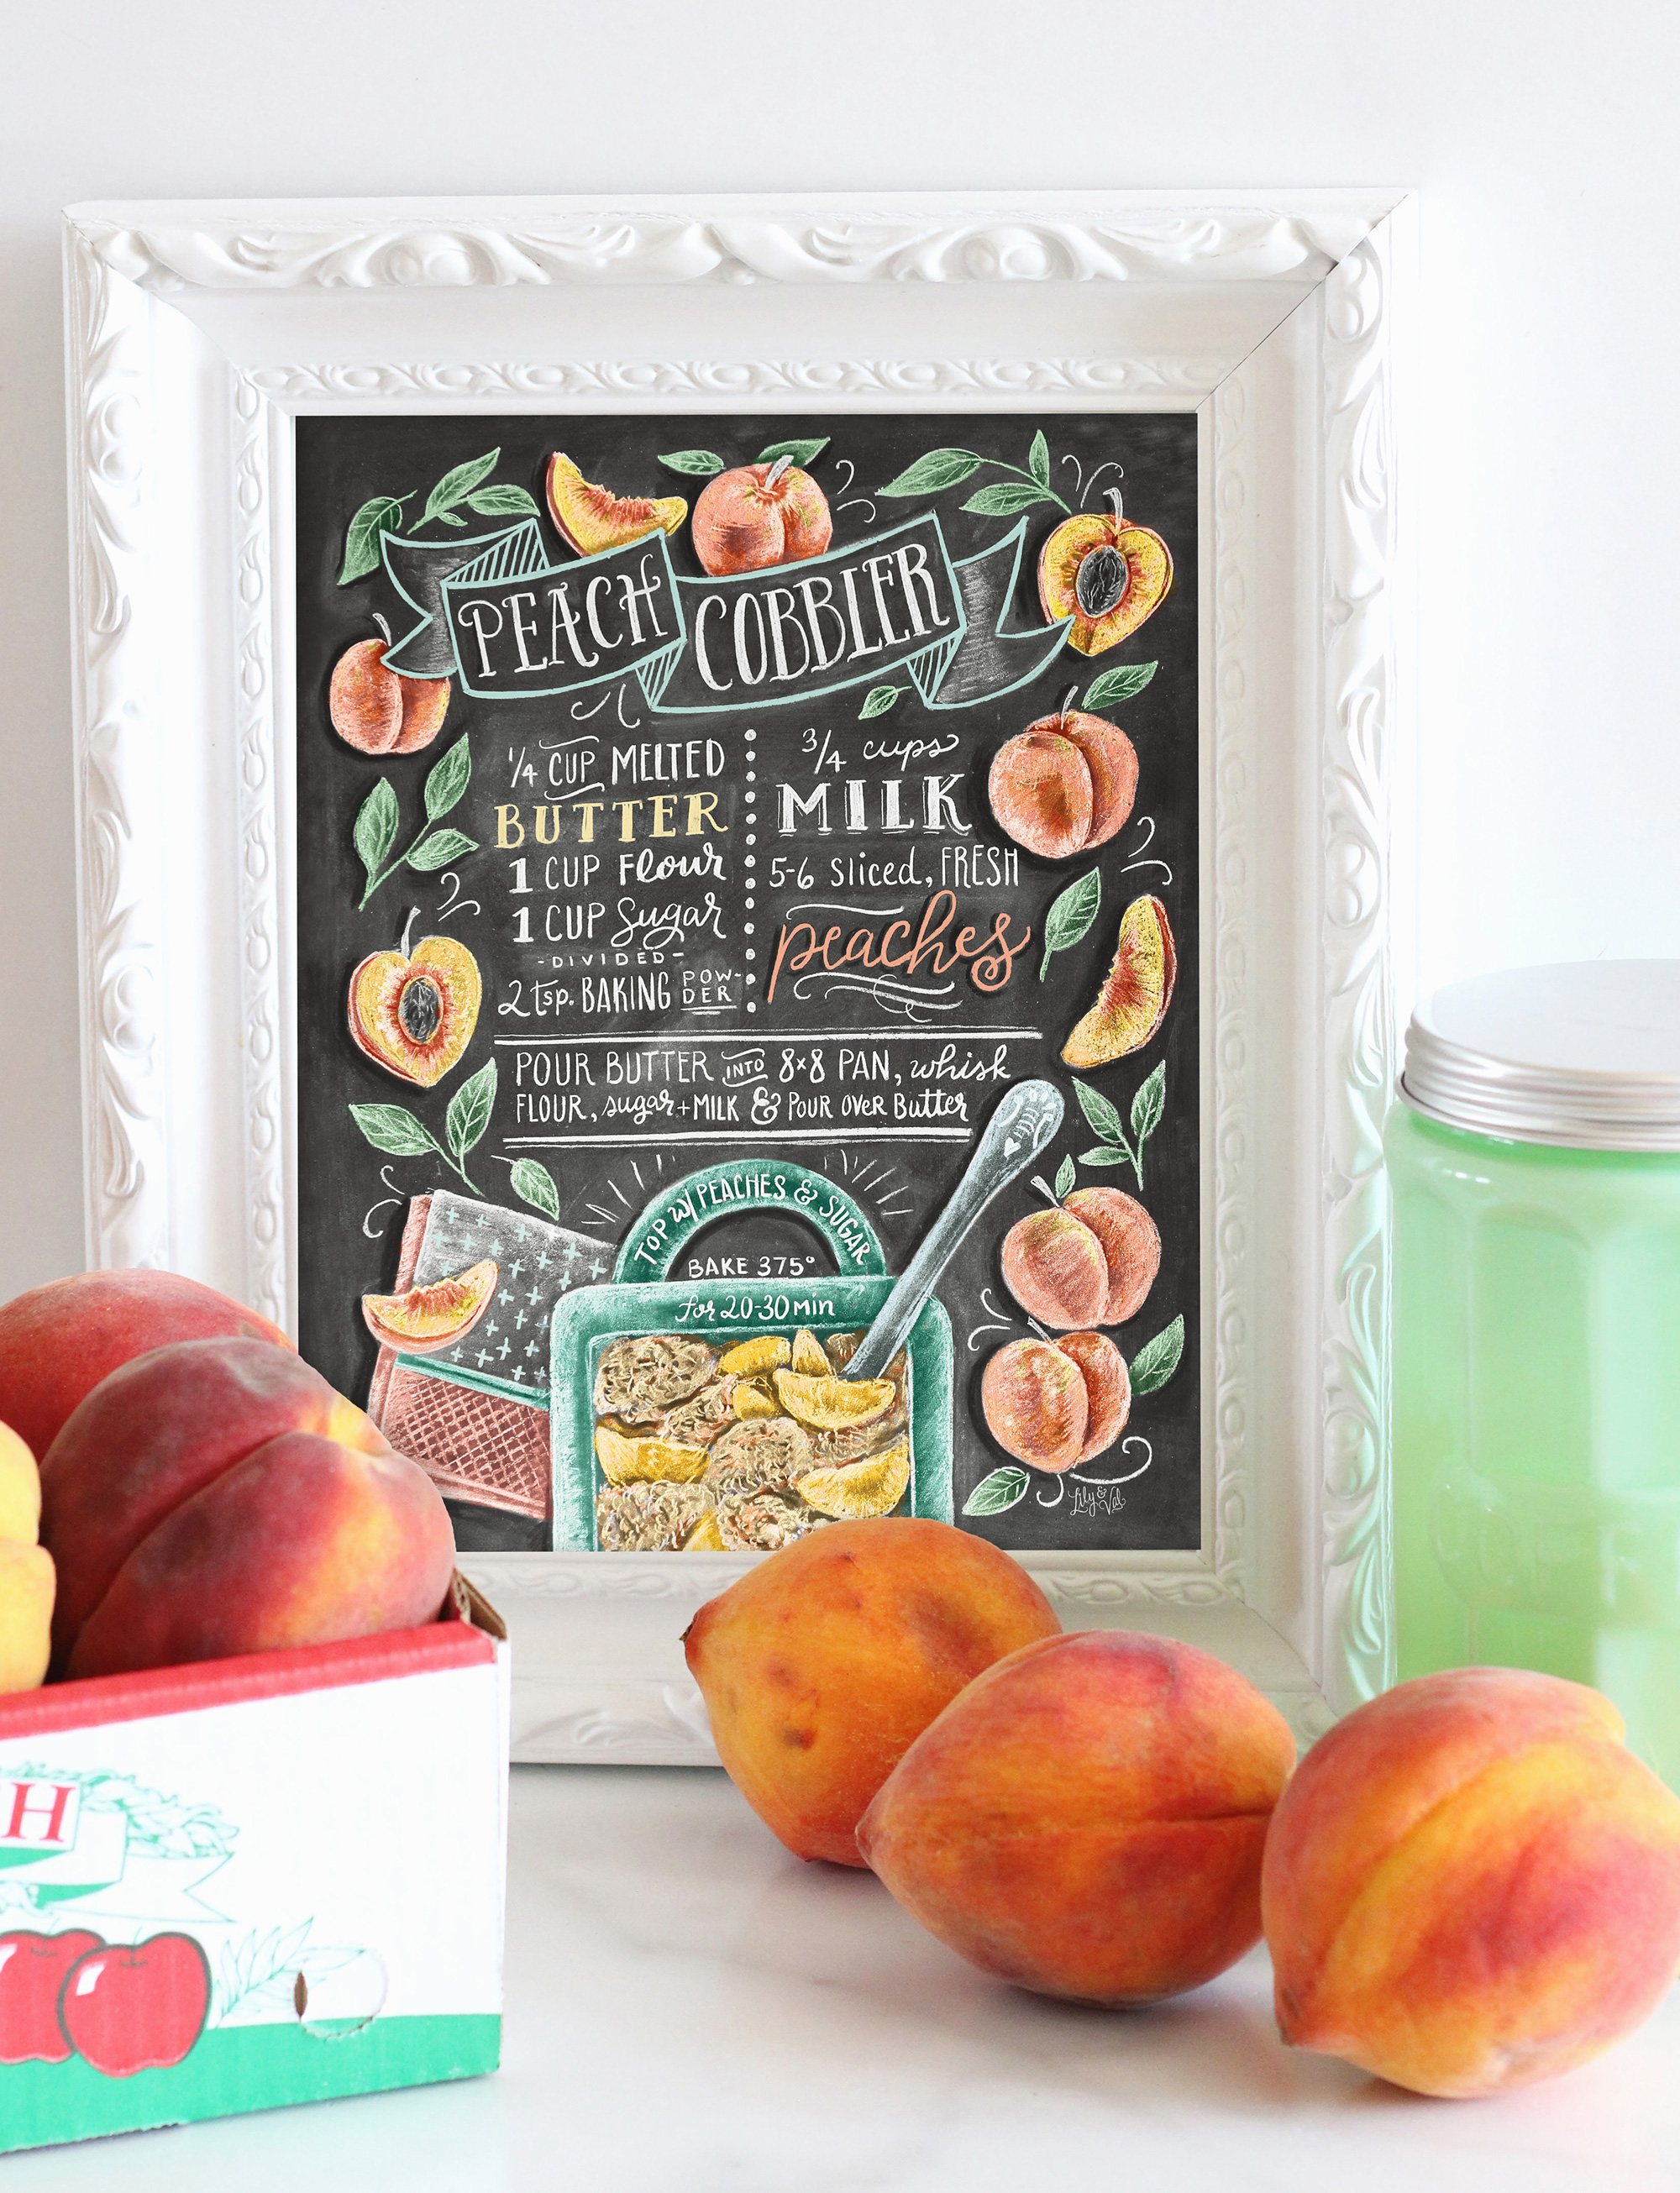 Peach Cobbler illustrated recipe print for your kitchen walls! Hand-illustrated kitchen art by Valerie McKeehan